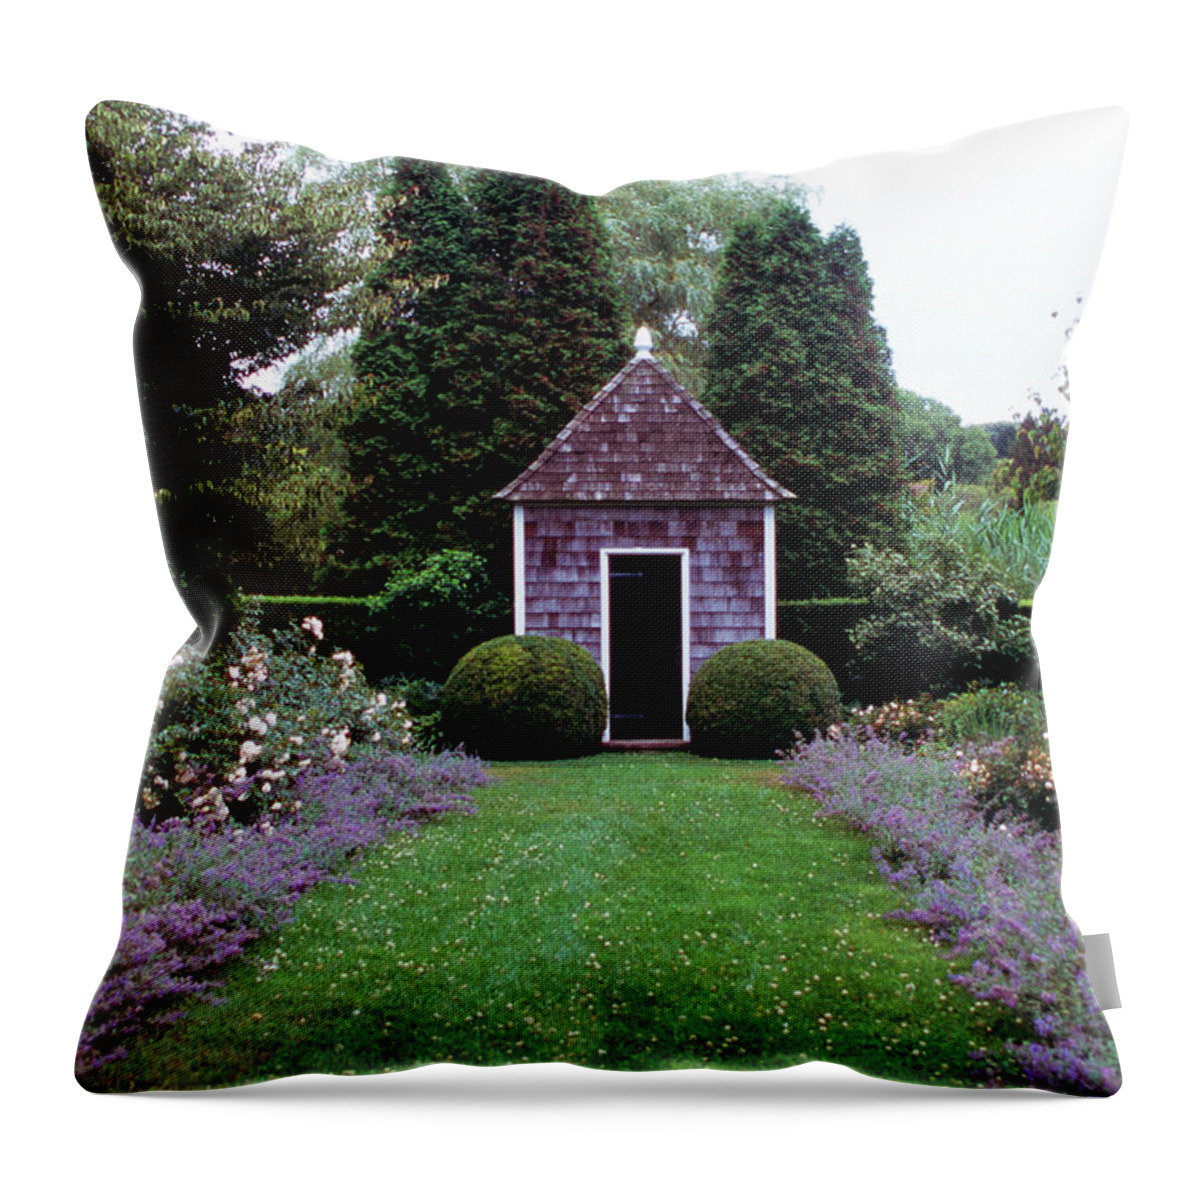 Tranquility Throw Pillow featuring the photograph Garden Tool Shed by Richard Felber